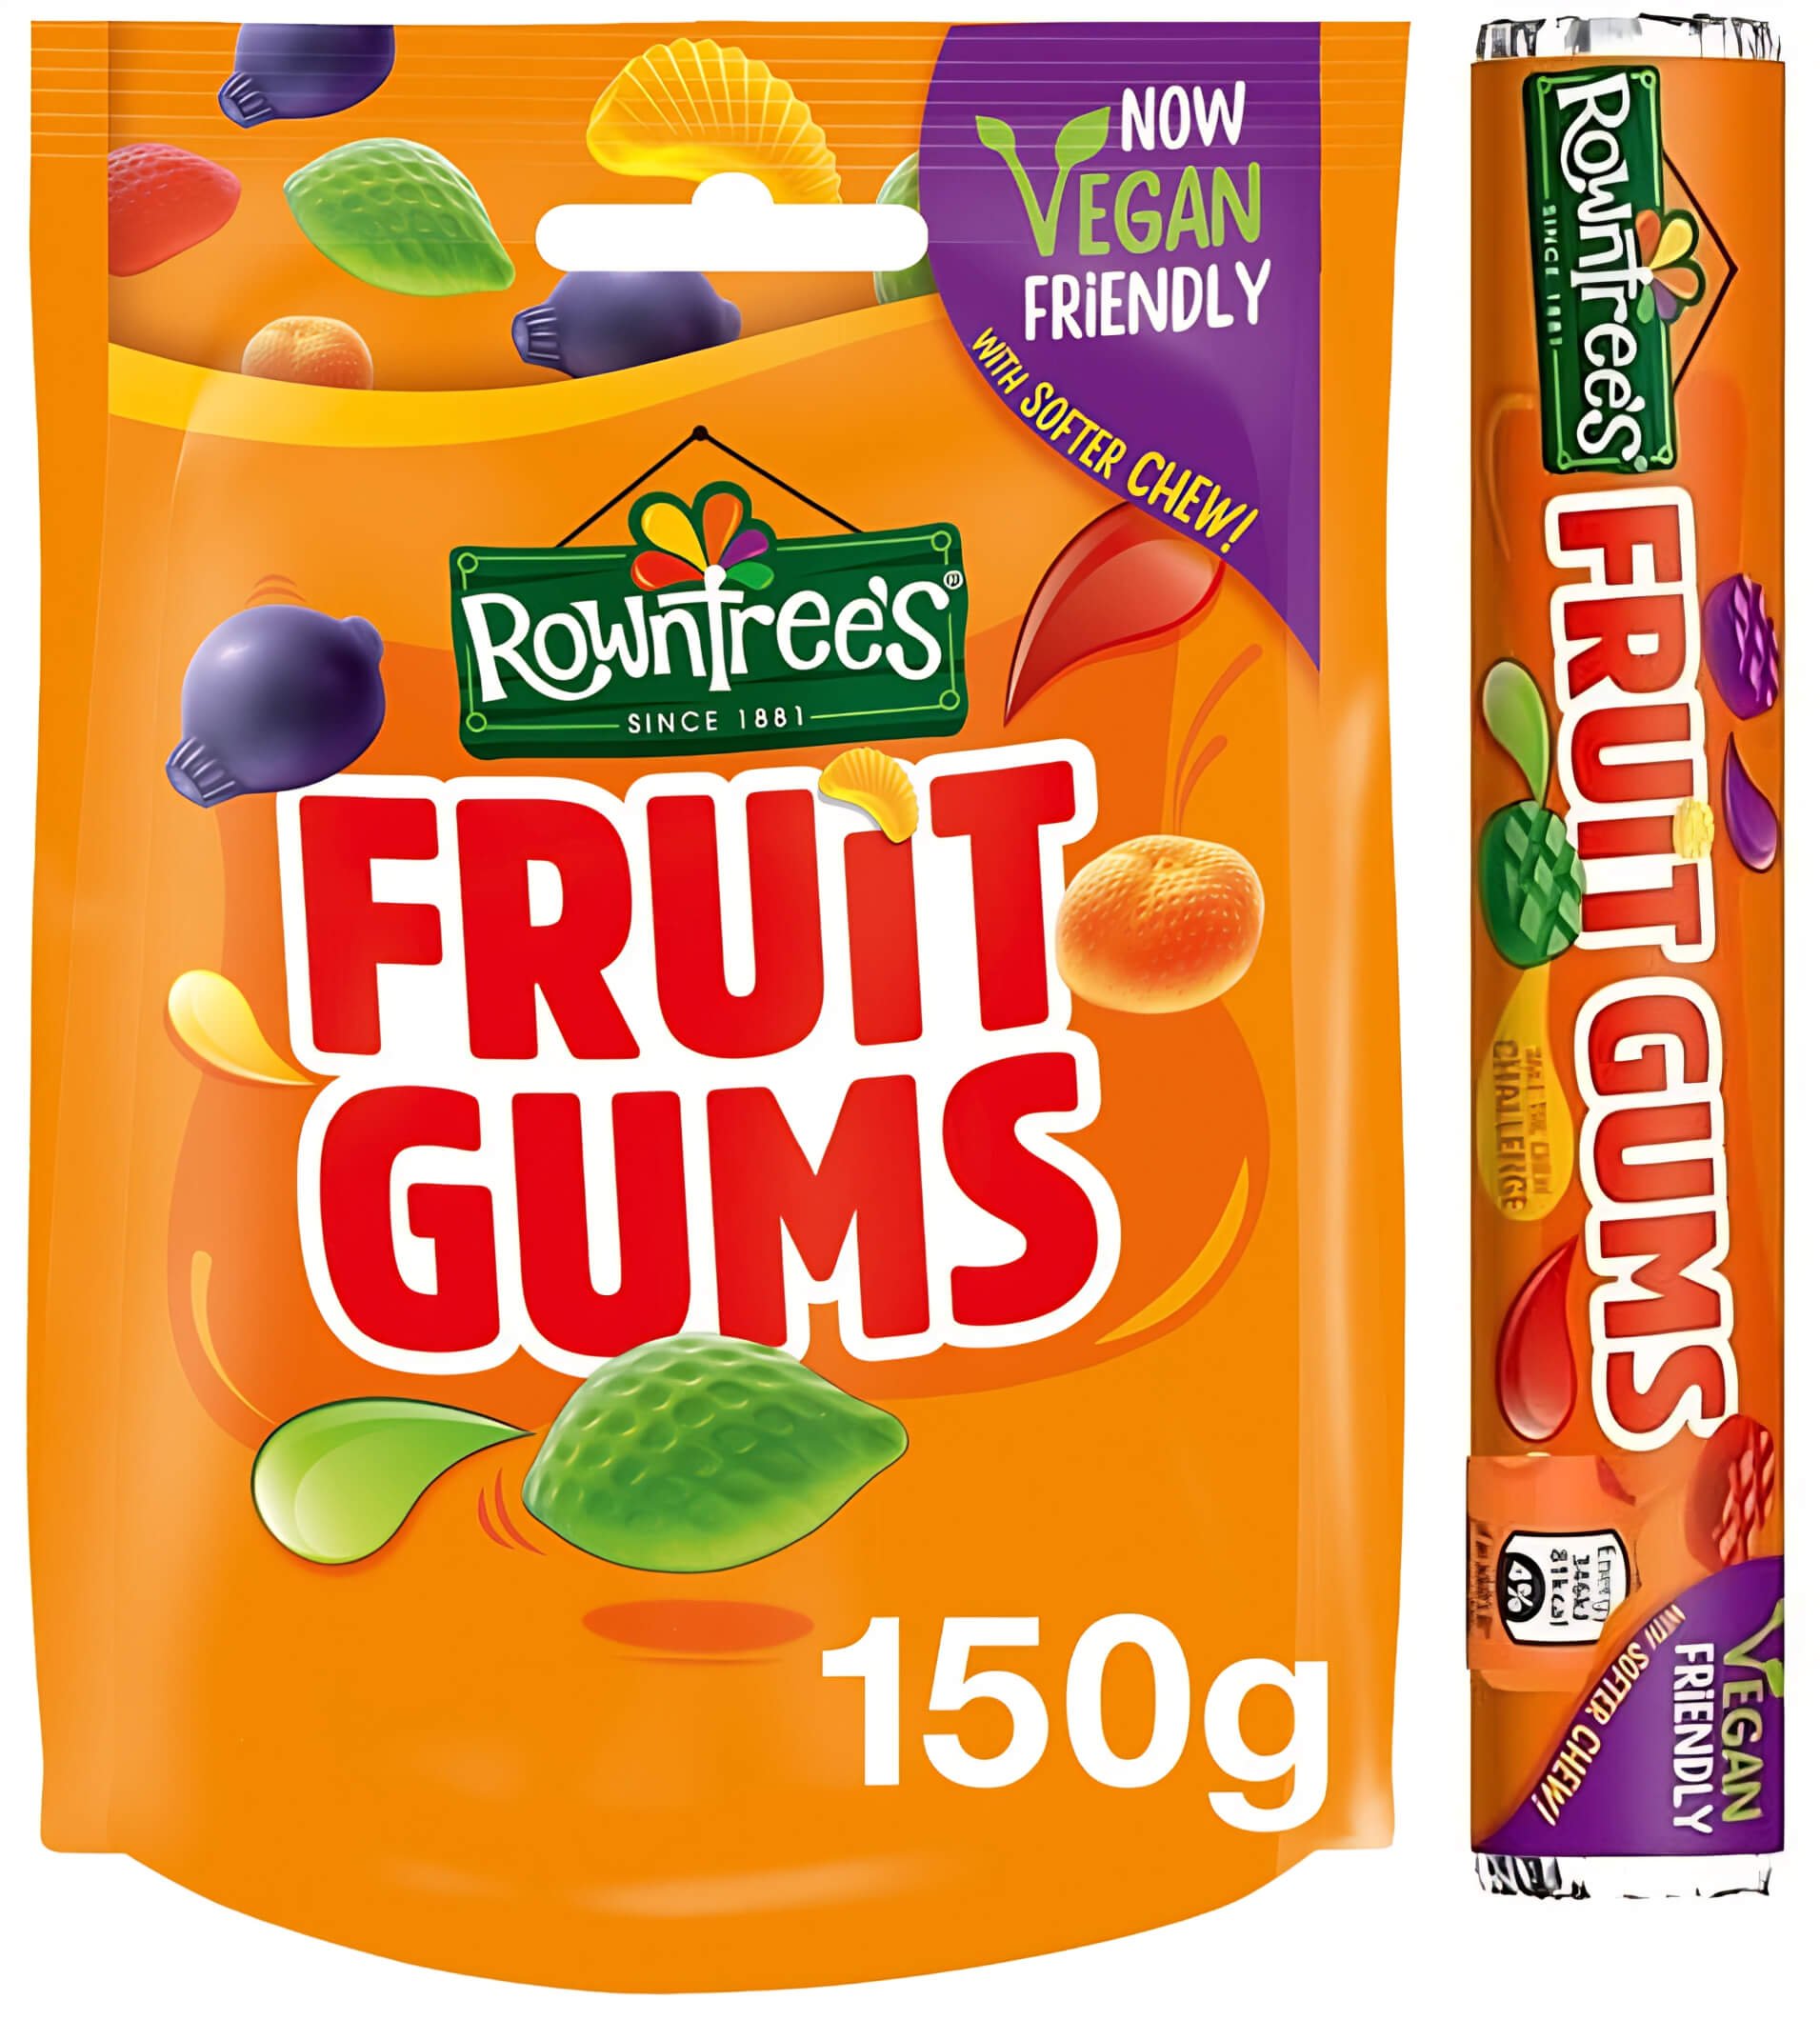 Rowntree's Fruit Gums share pouch and tube from 2022. Vegan friendly and softer chew